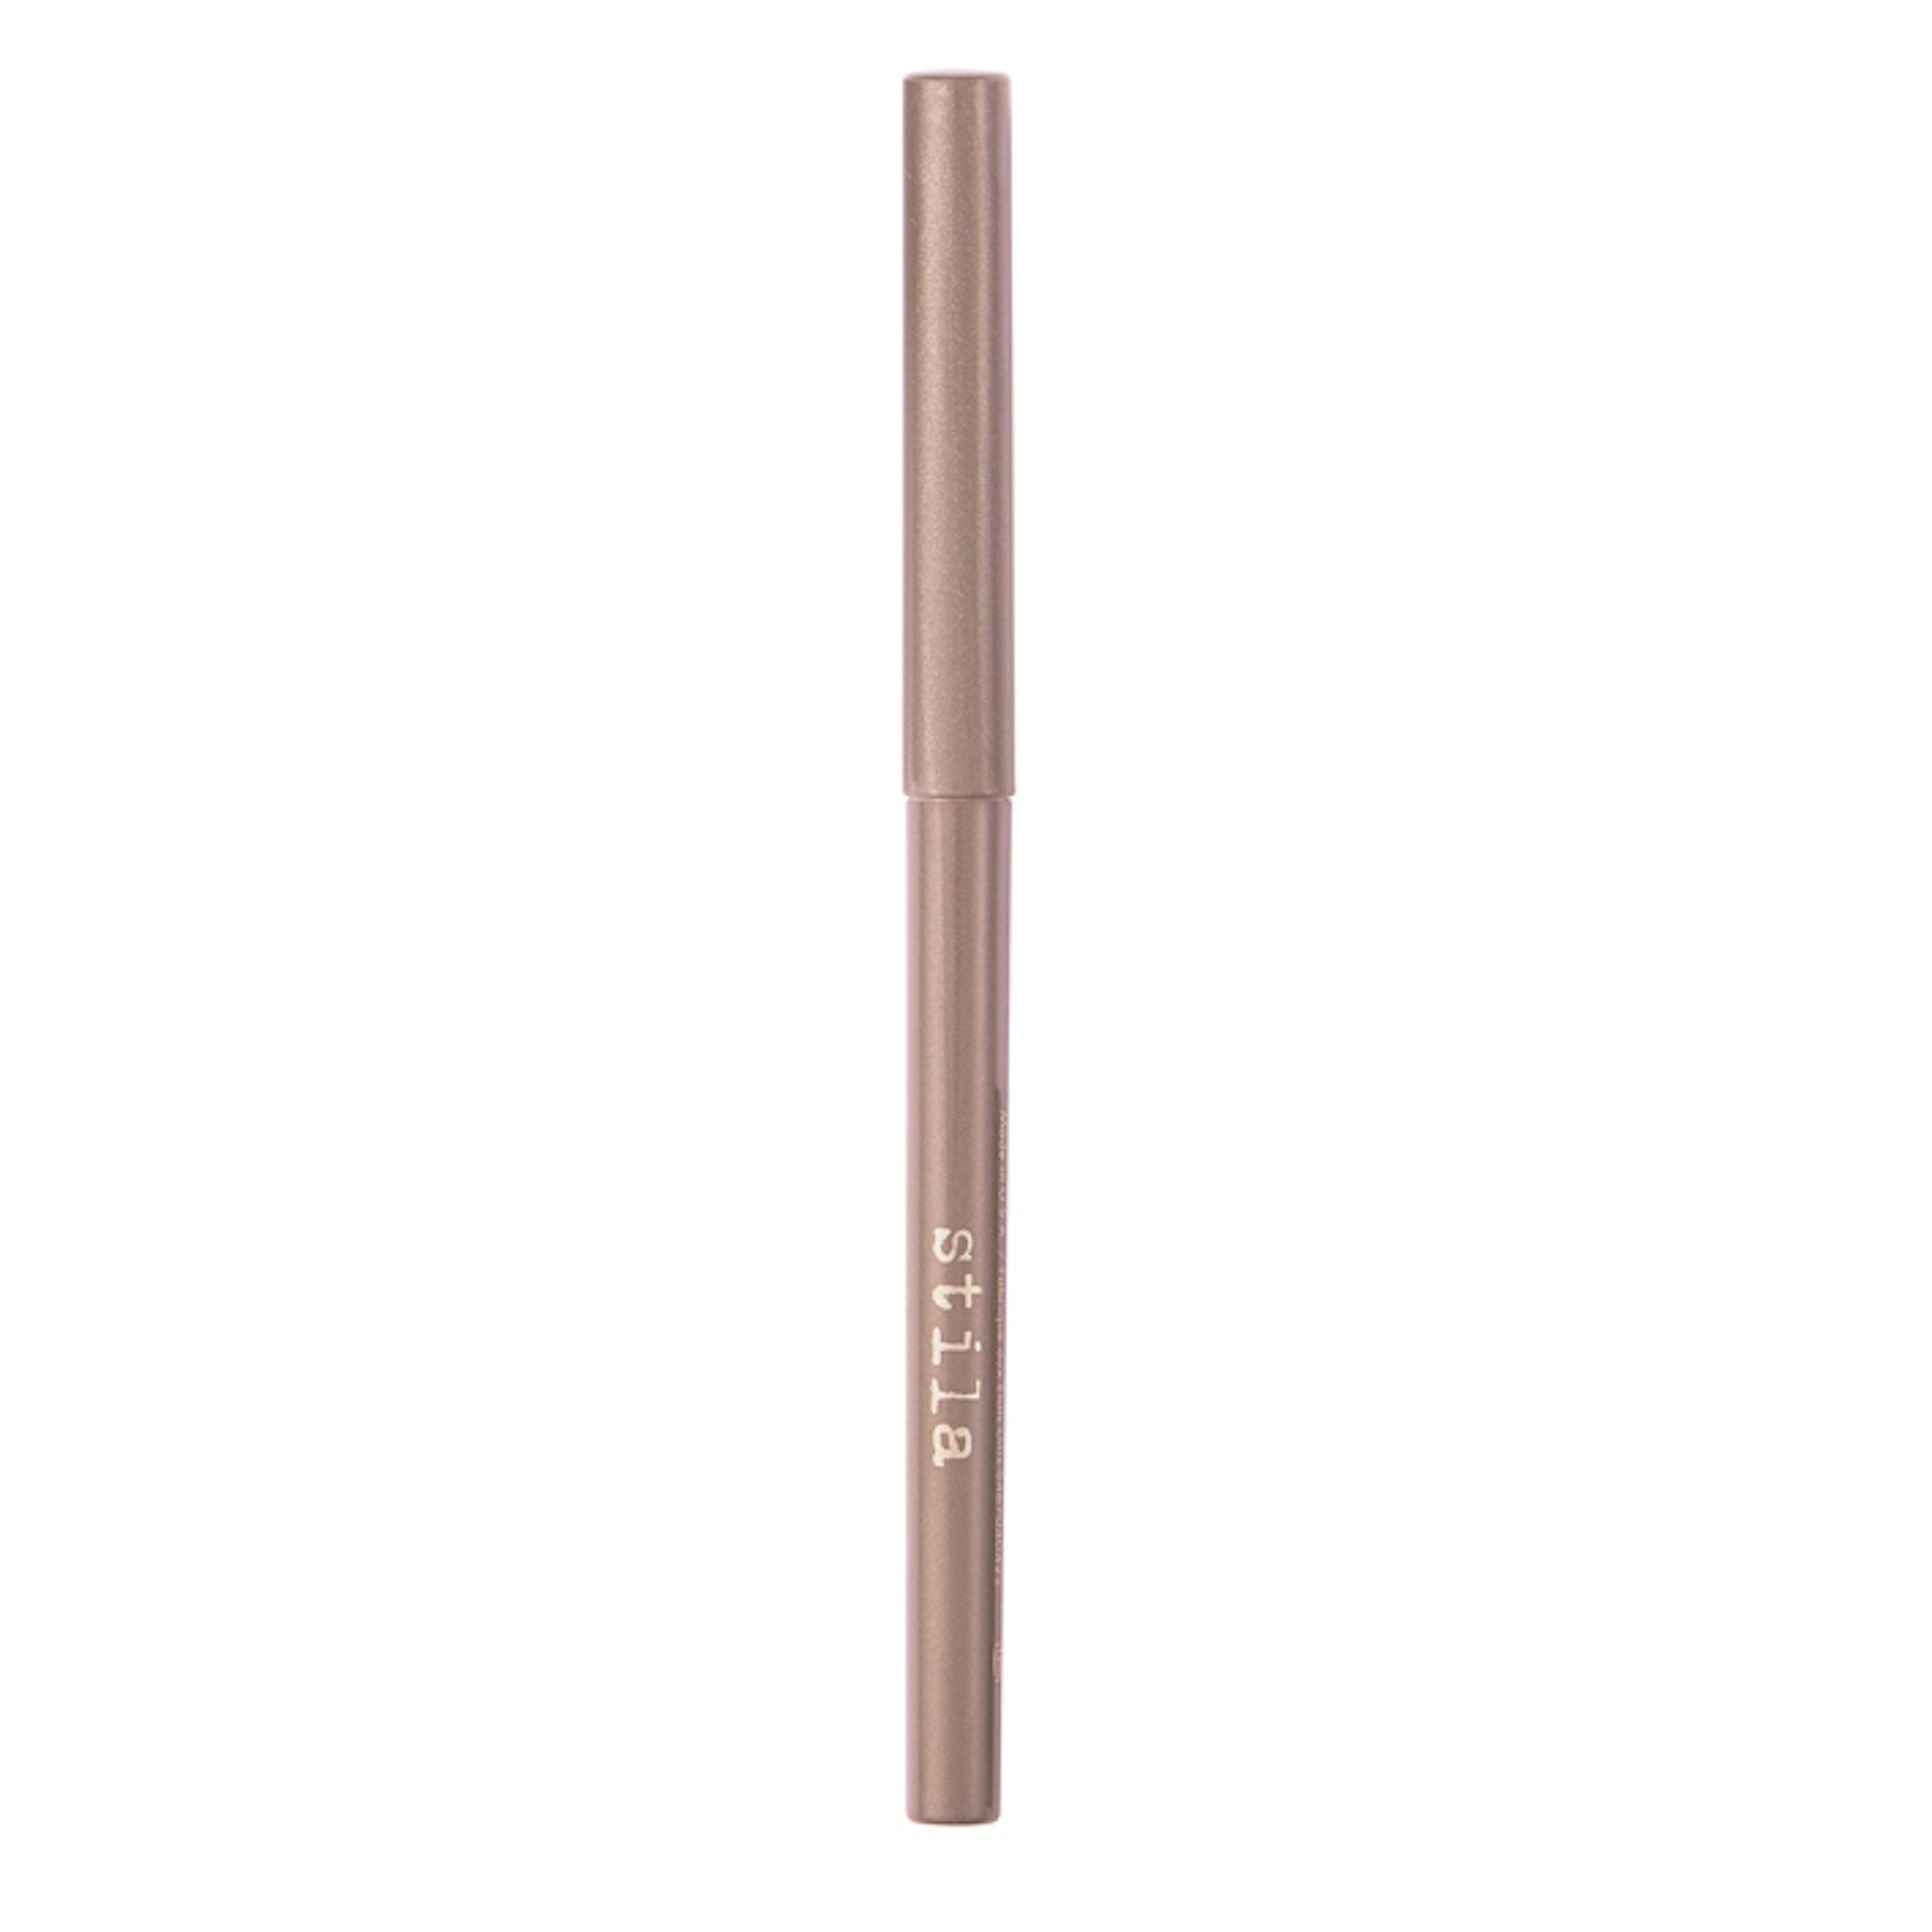 Stay All Day® Smudge Stick Waterproof Eye Liner